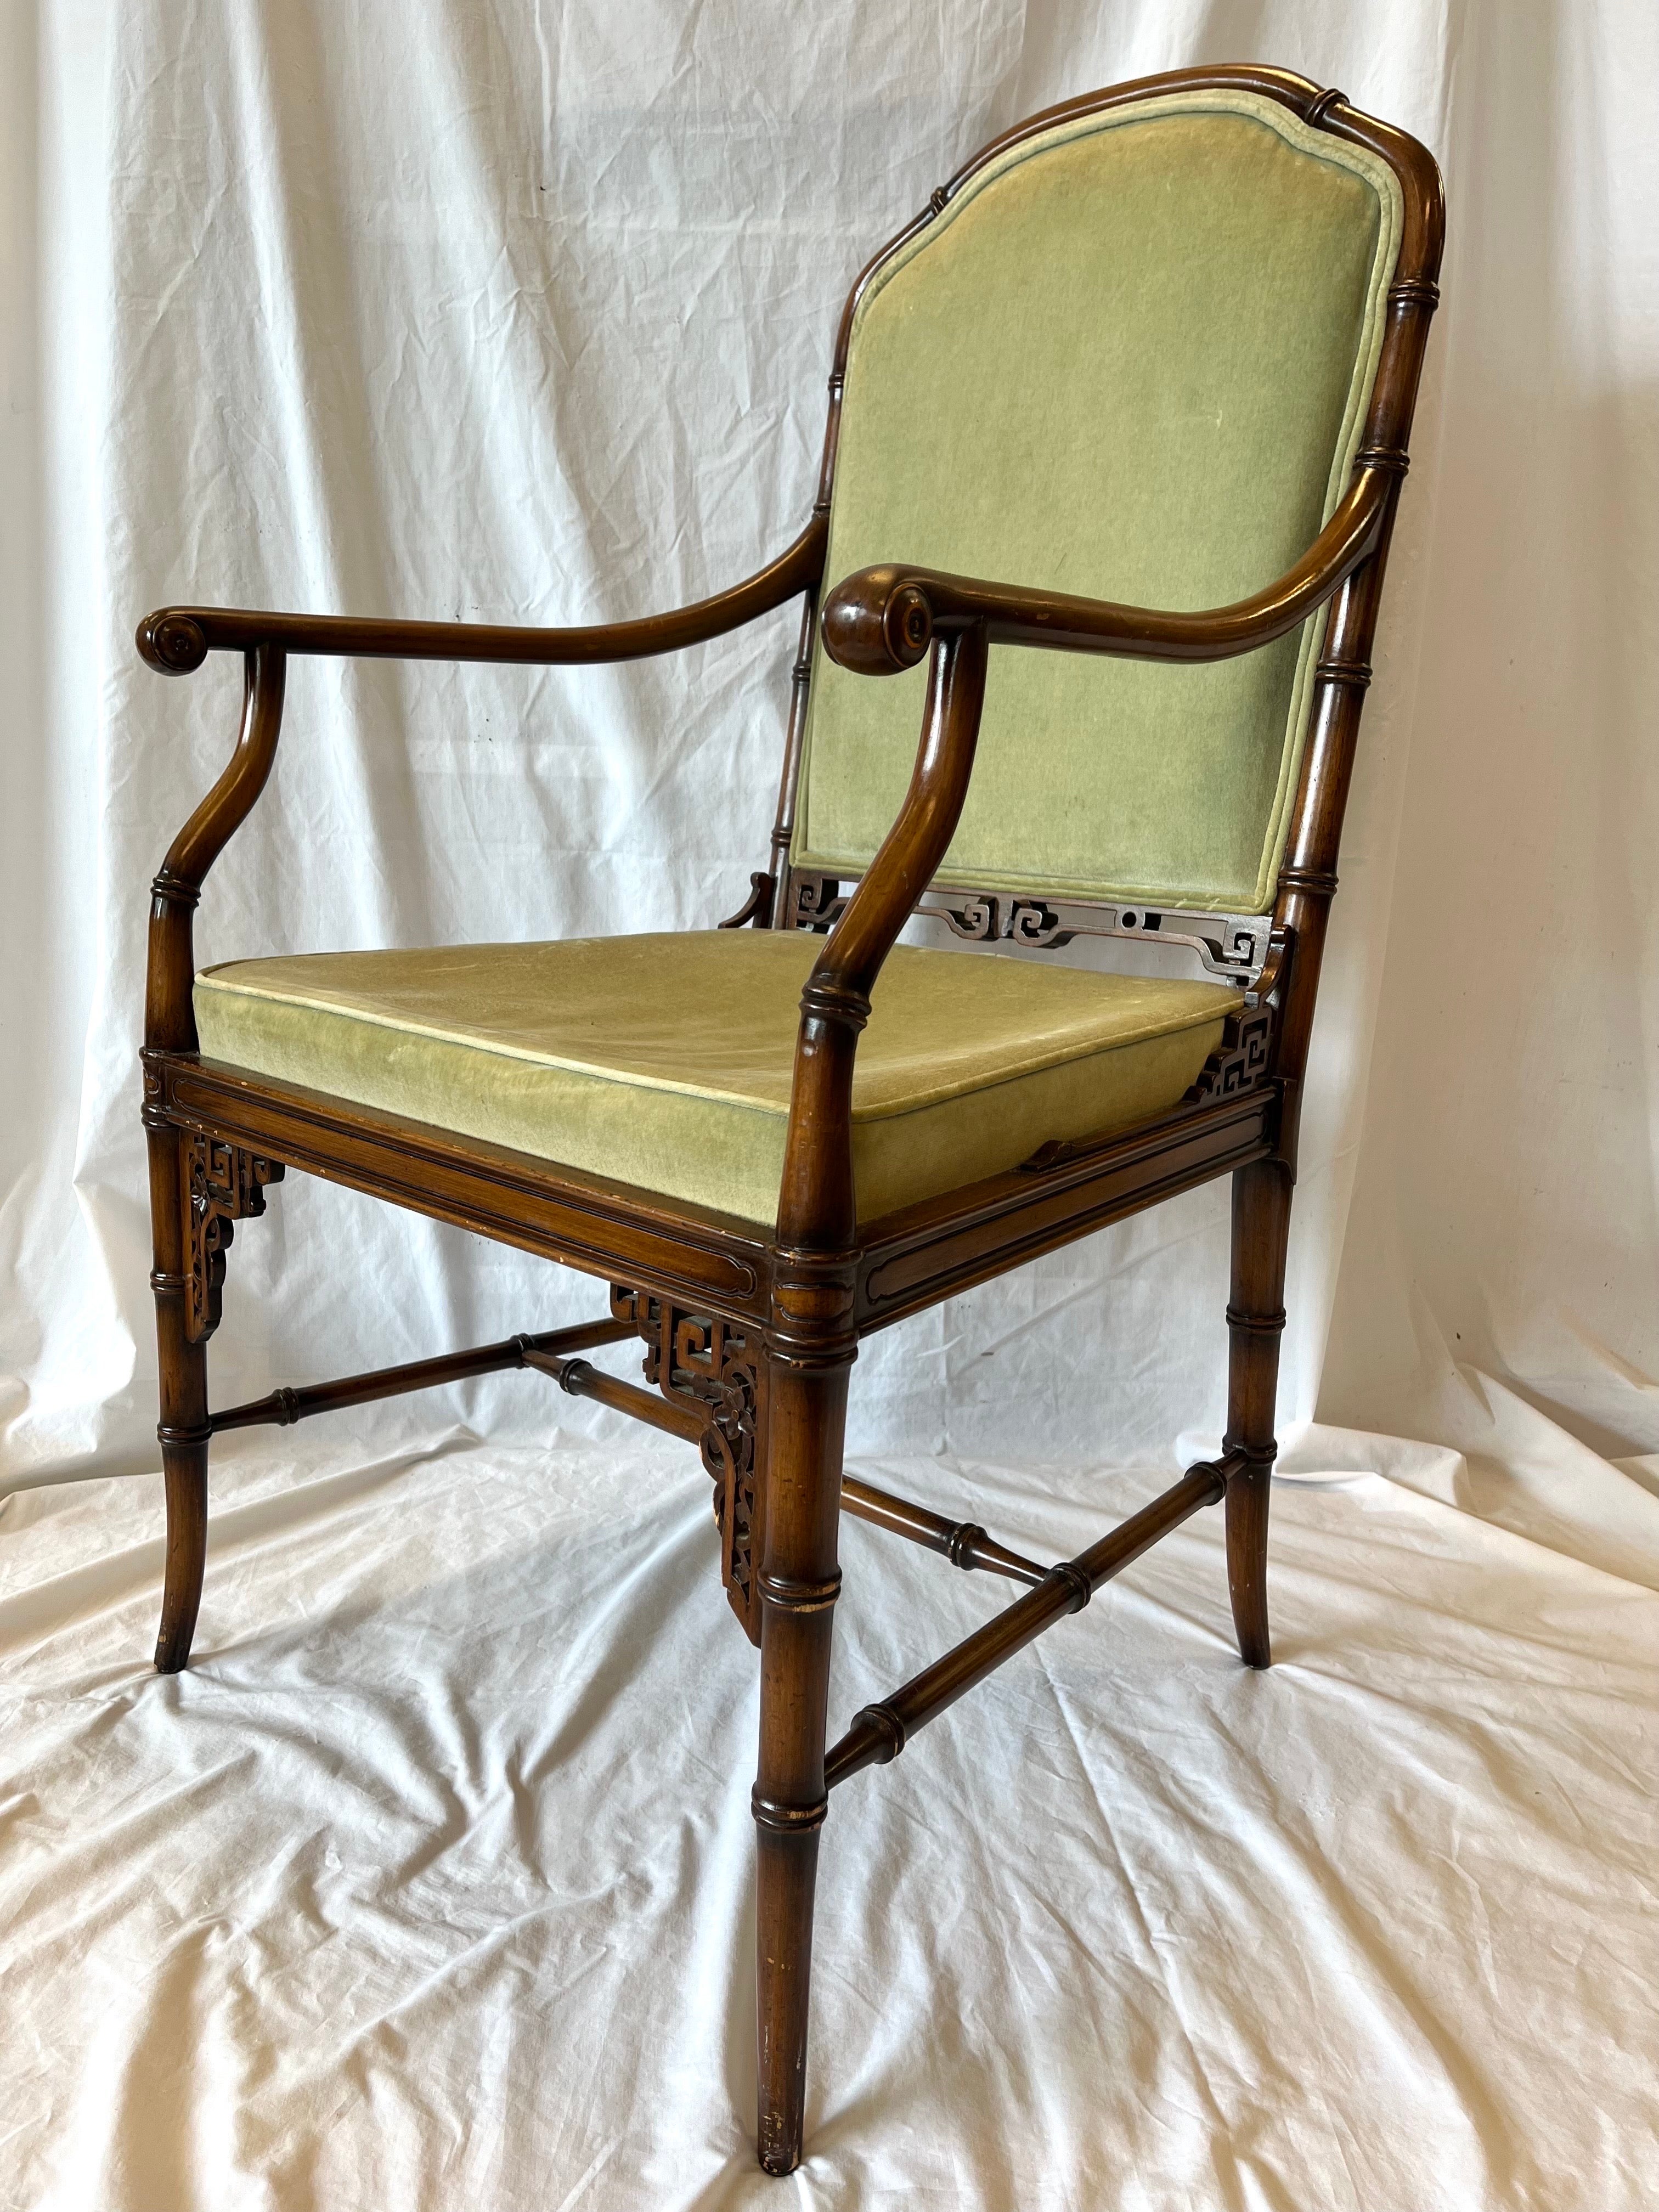 A vintage, mid 20th century era Chinoiserie or Chinese Chippendale or Regency style faux bamboo and upholstered armchair with open Asian style fretwork, scrolling arm rests and domed back rest. A truly beautifully designed chair that will serve you